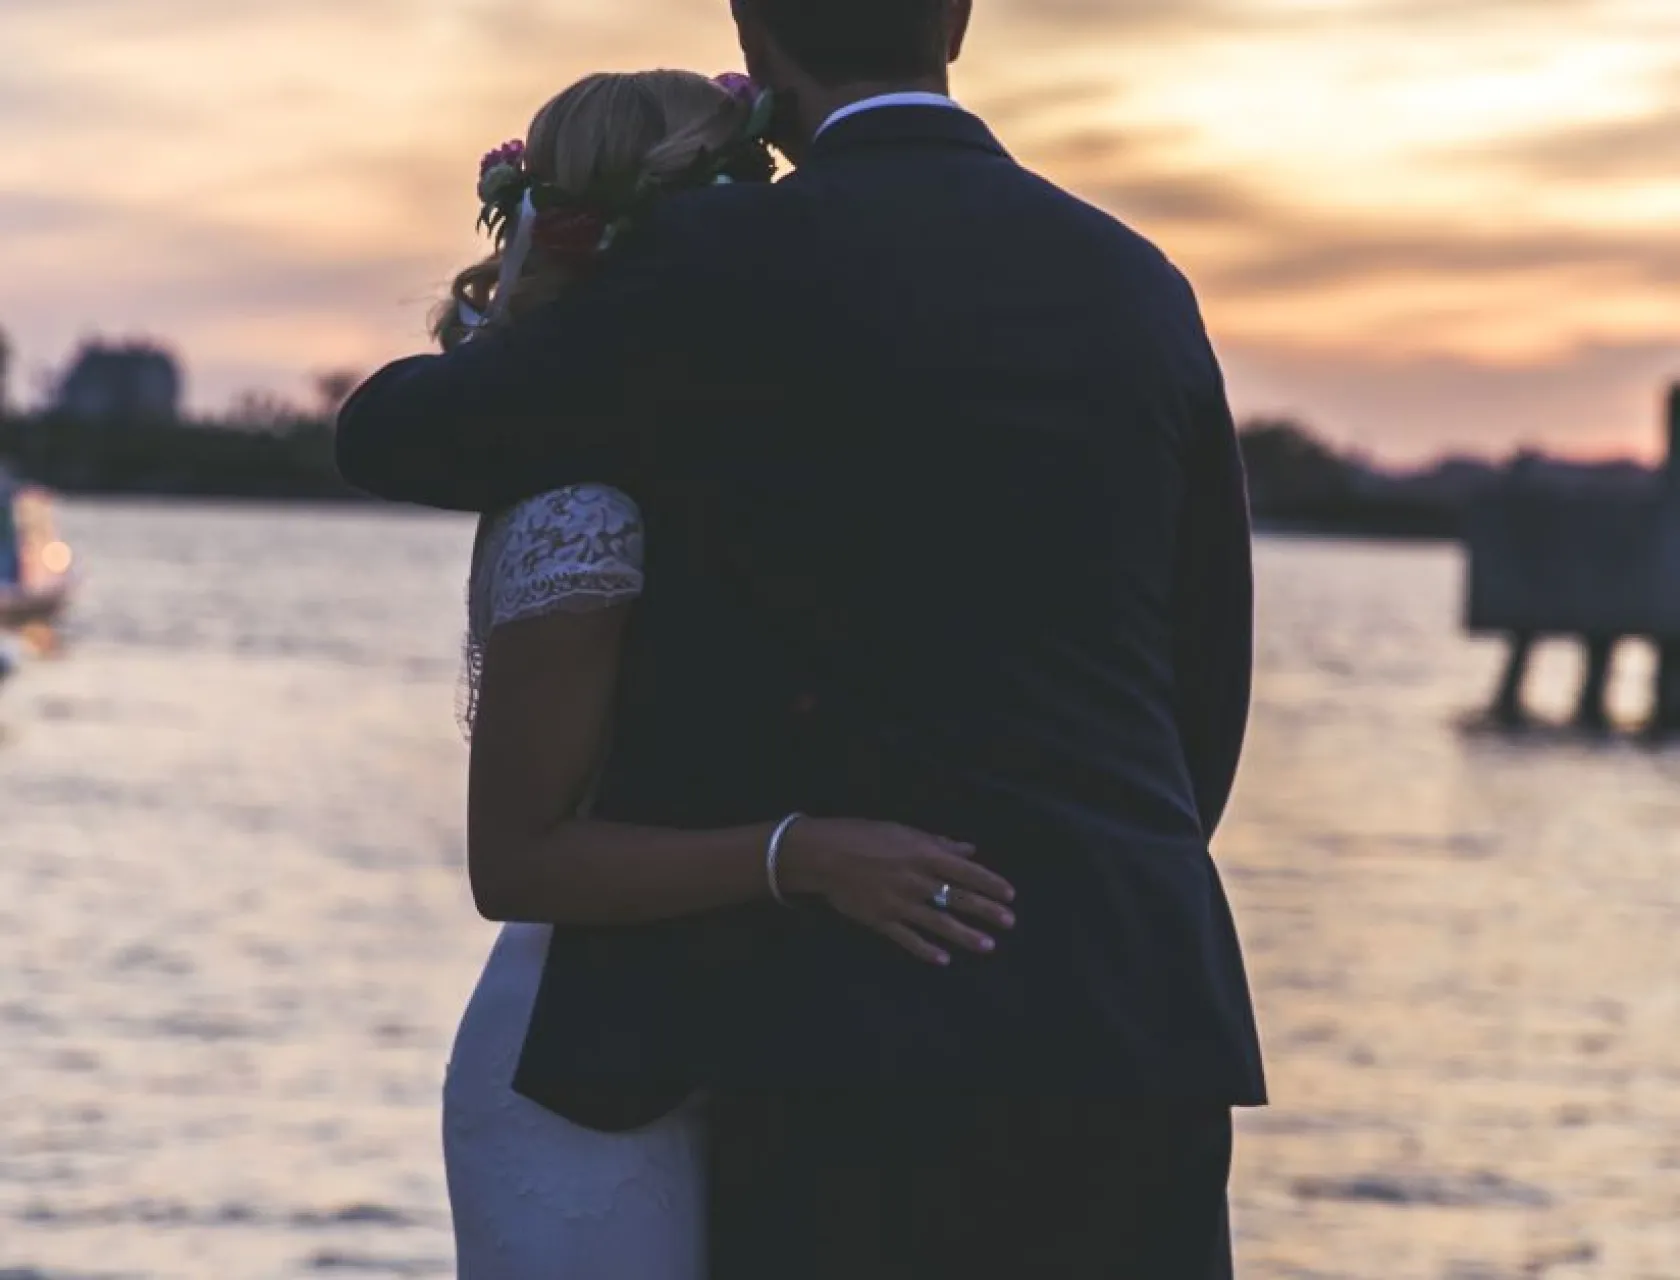 Boat wedding recommendations